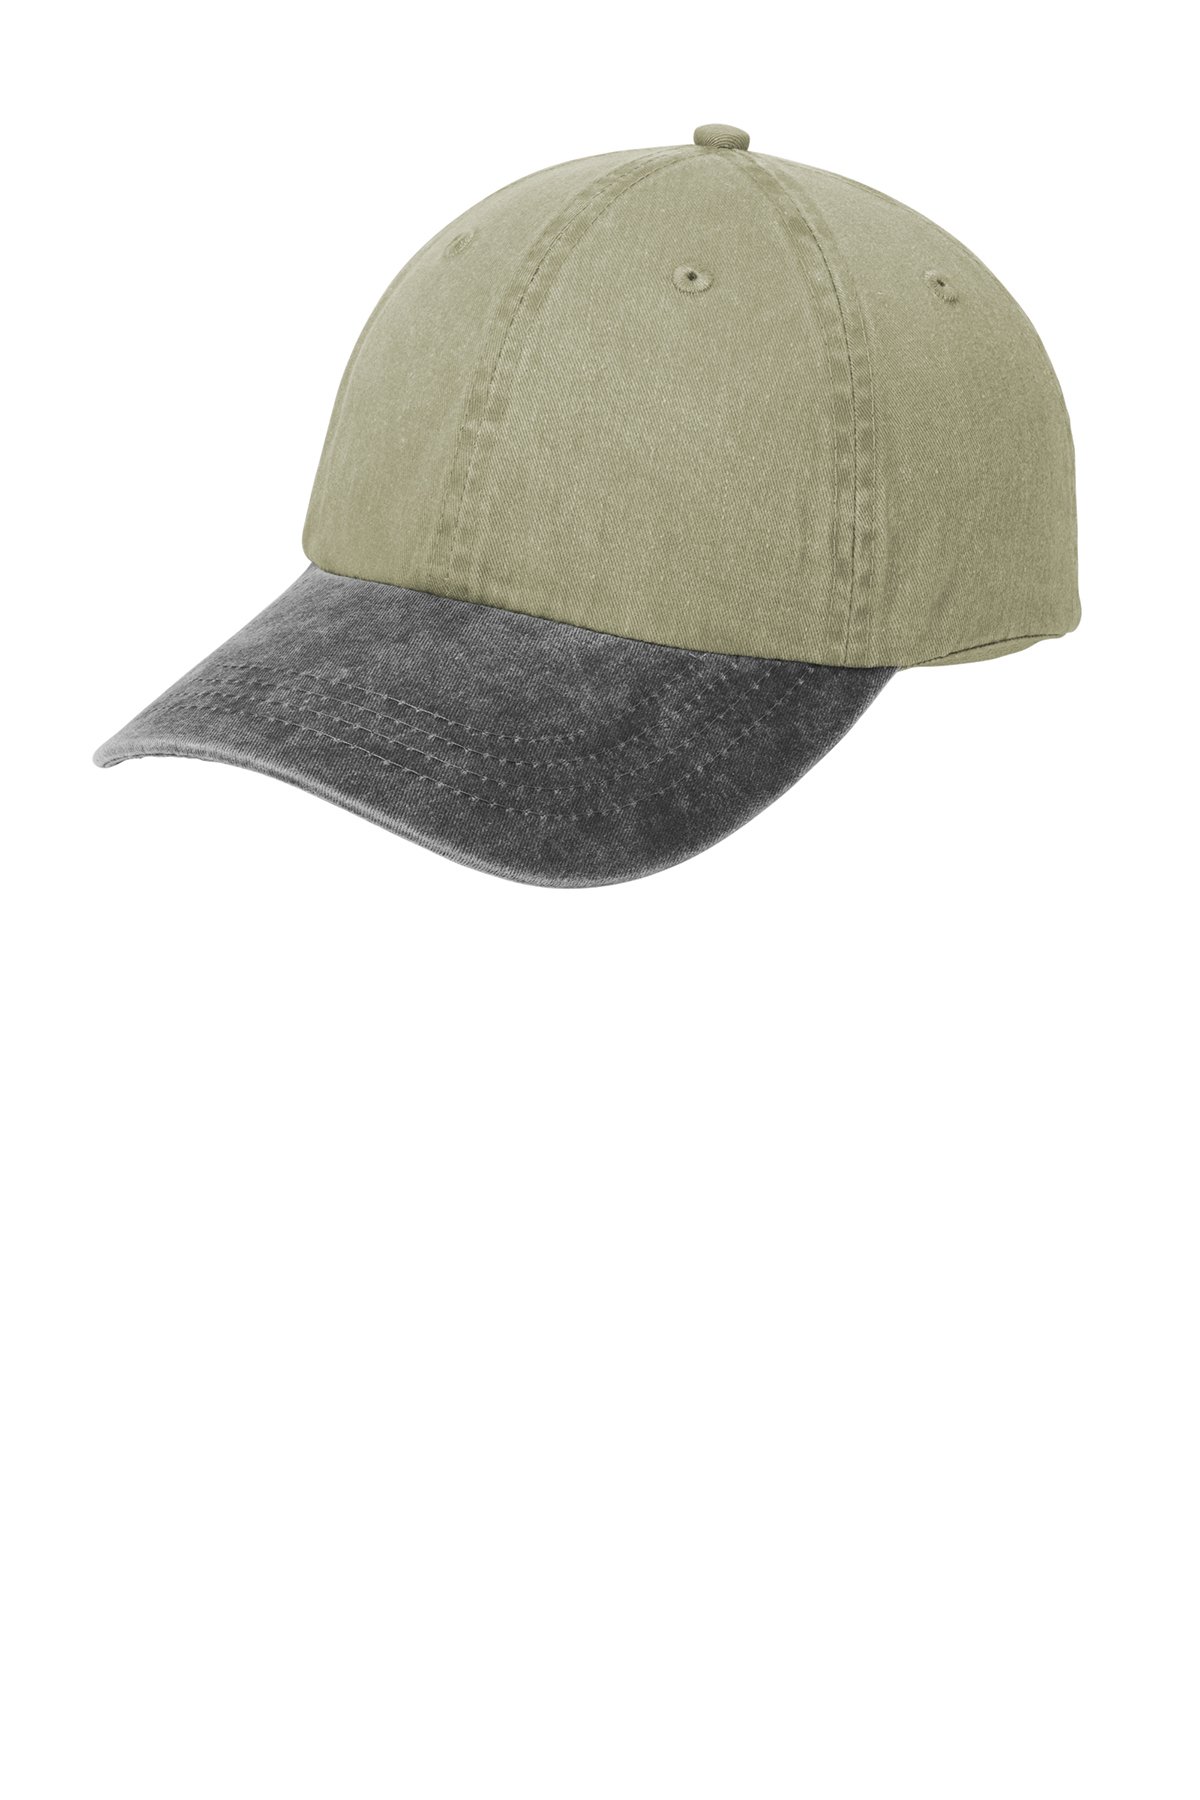 Two-Tone Pigment-Dyed Cap | Product | Port - Port & Company